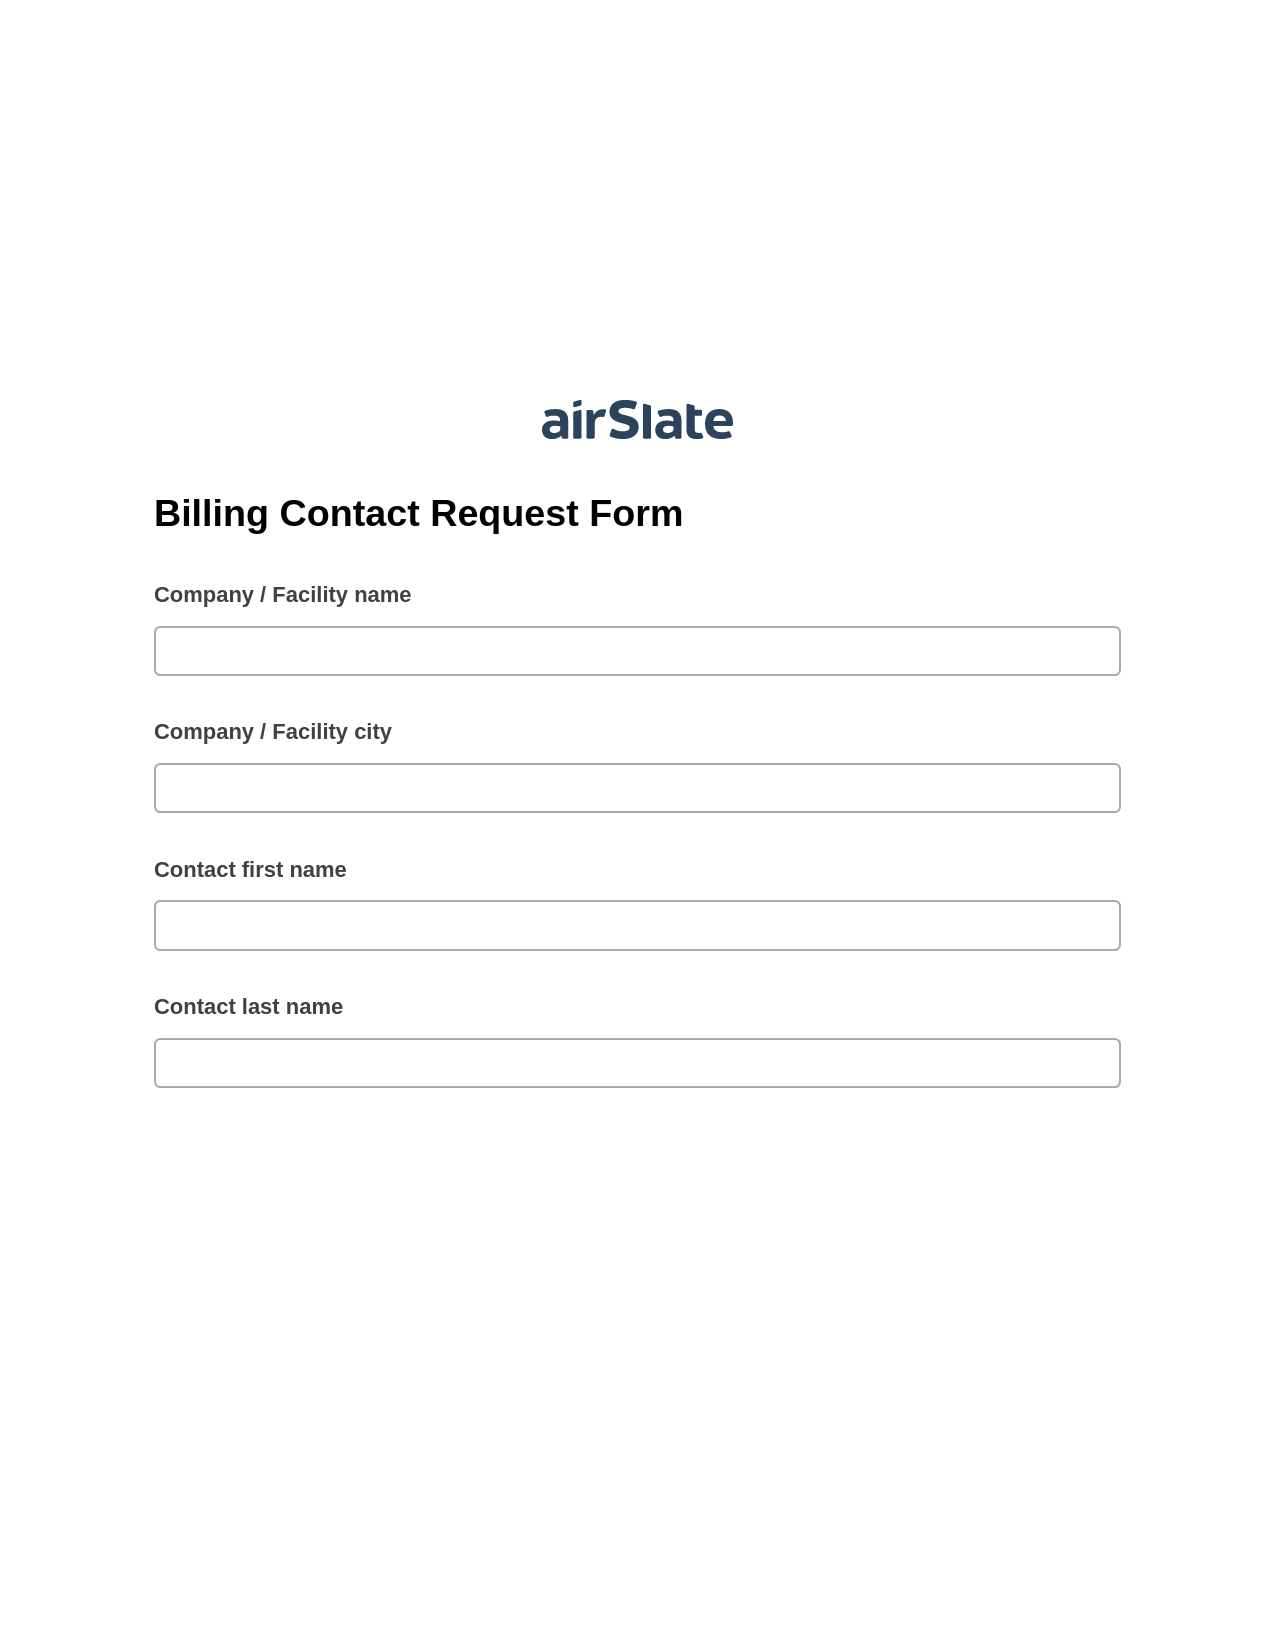 Multirole Billing Contact Request Form Pre-fill from Salesforce Records with SOQL Bot, SendGrid send Campaign bot, Export to Smartsheet